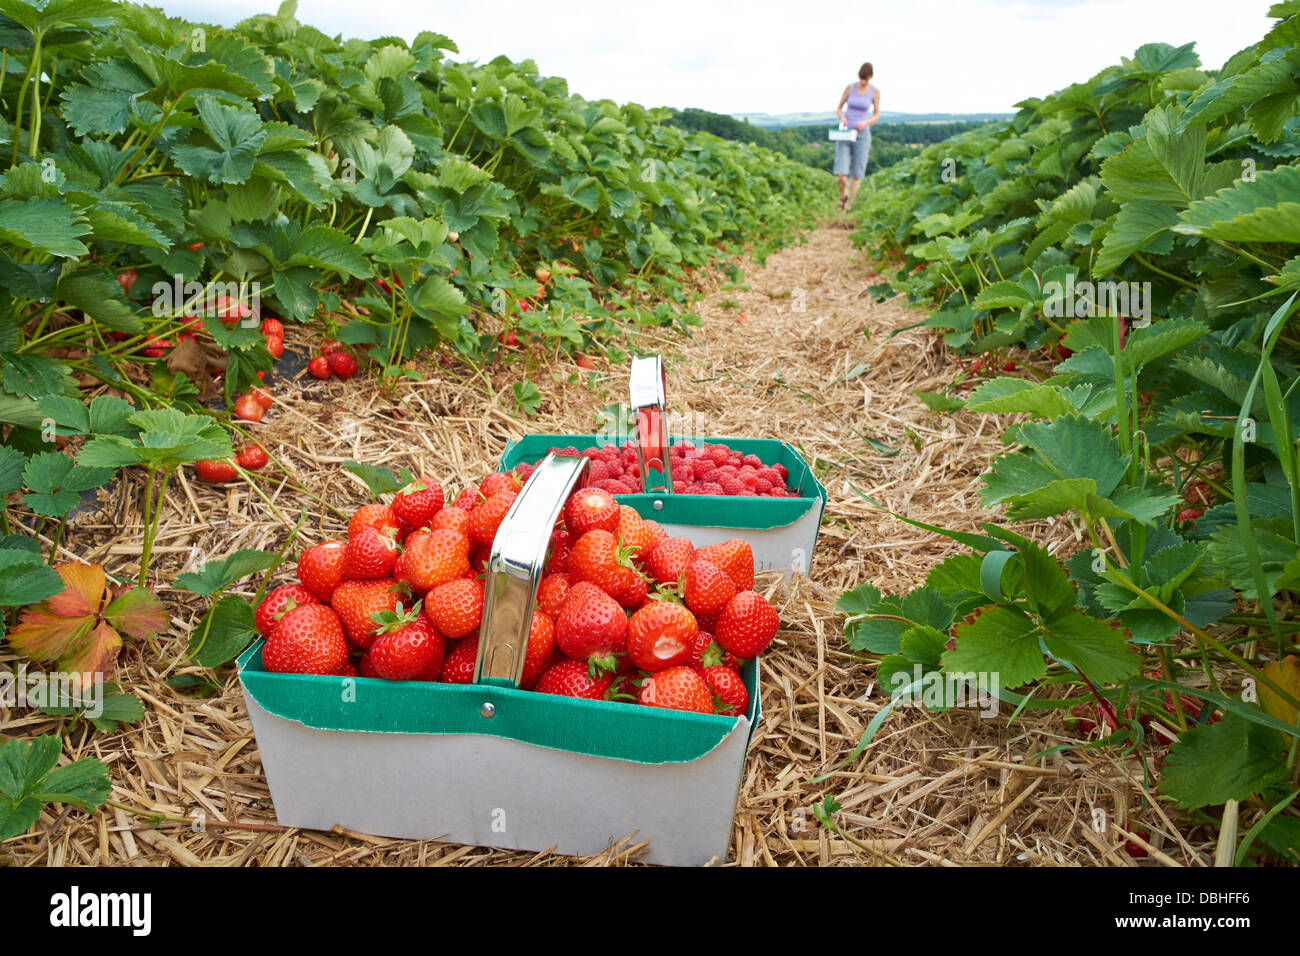 A woman picking ripe red strawberries at a fruit farm in the summer. Stock Photo